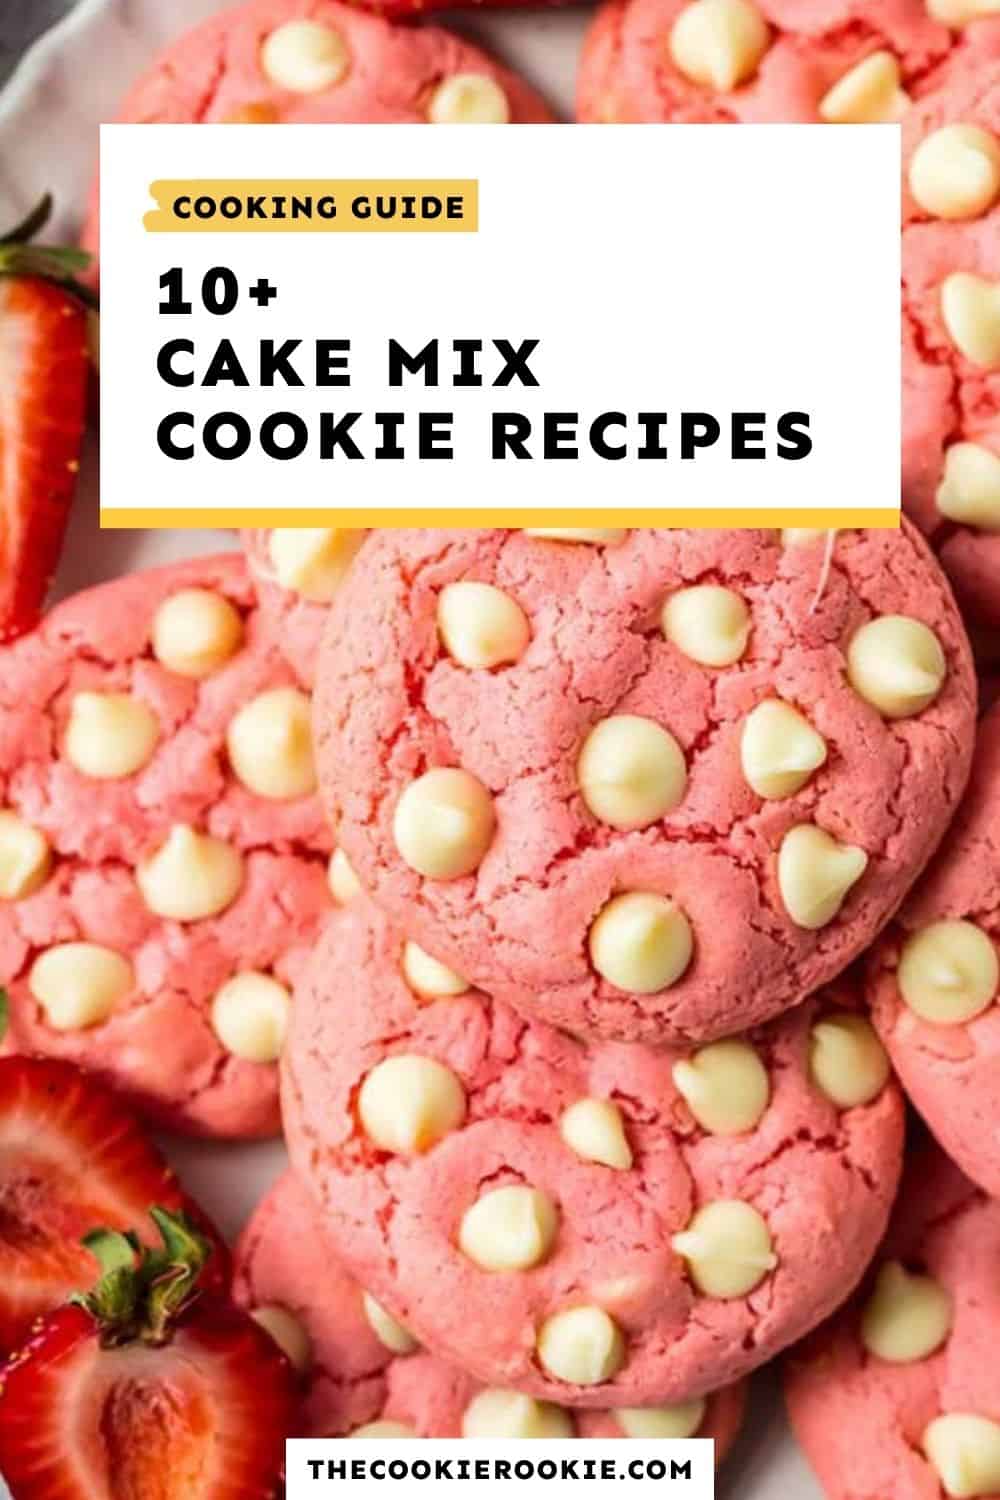 How to Make Cookies from Cake Mix